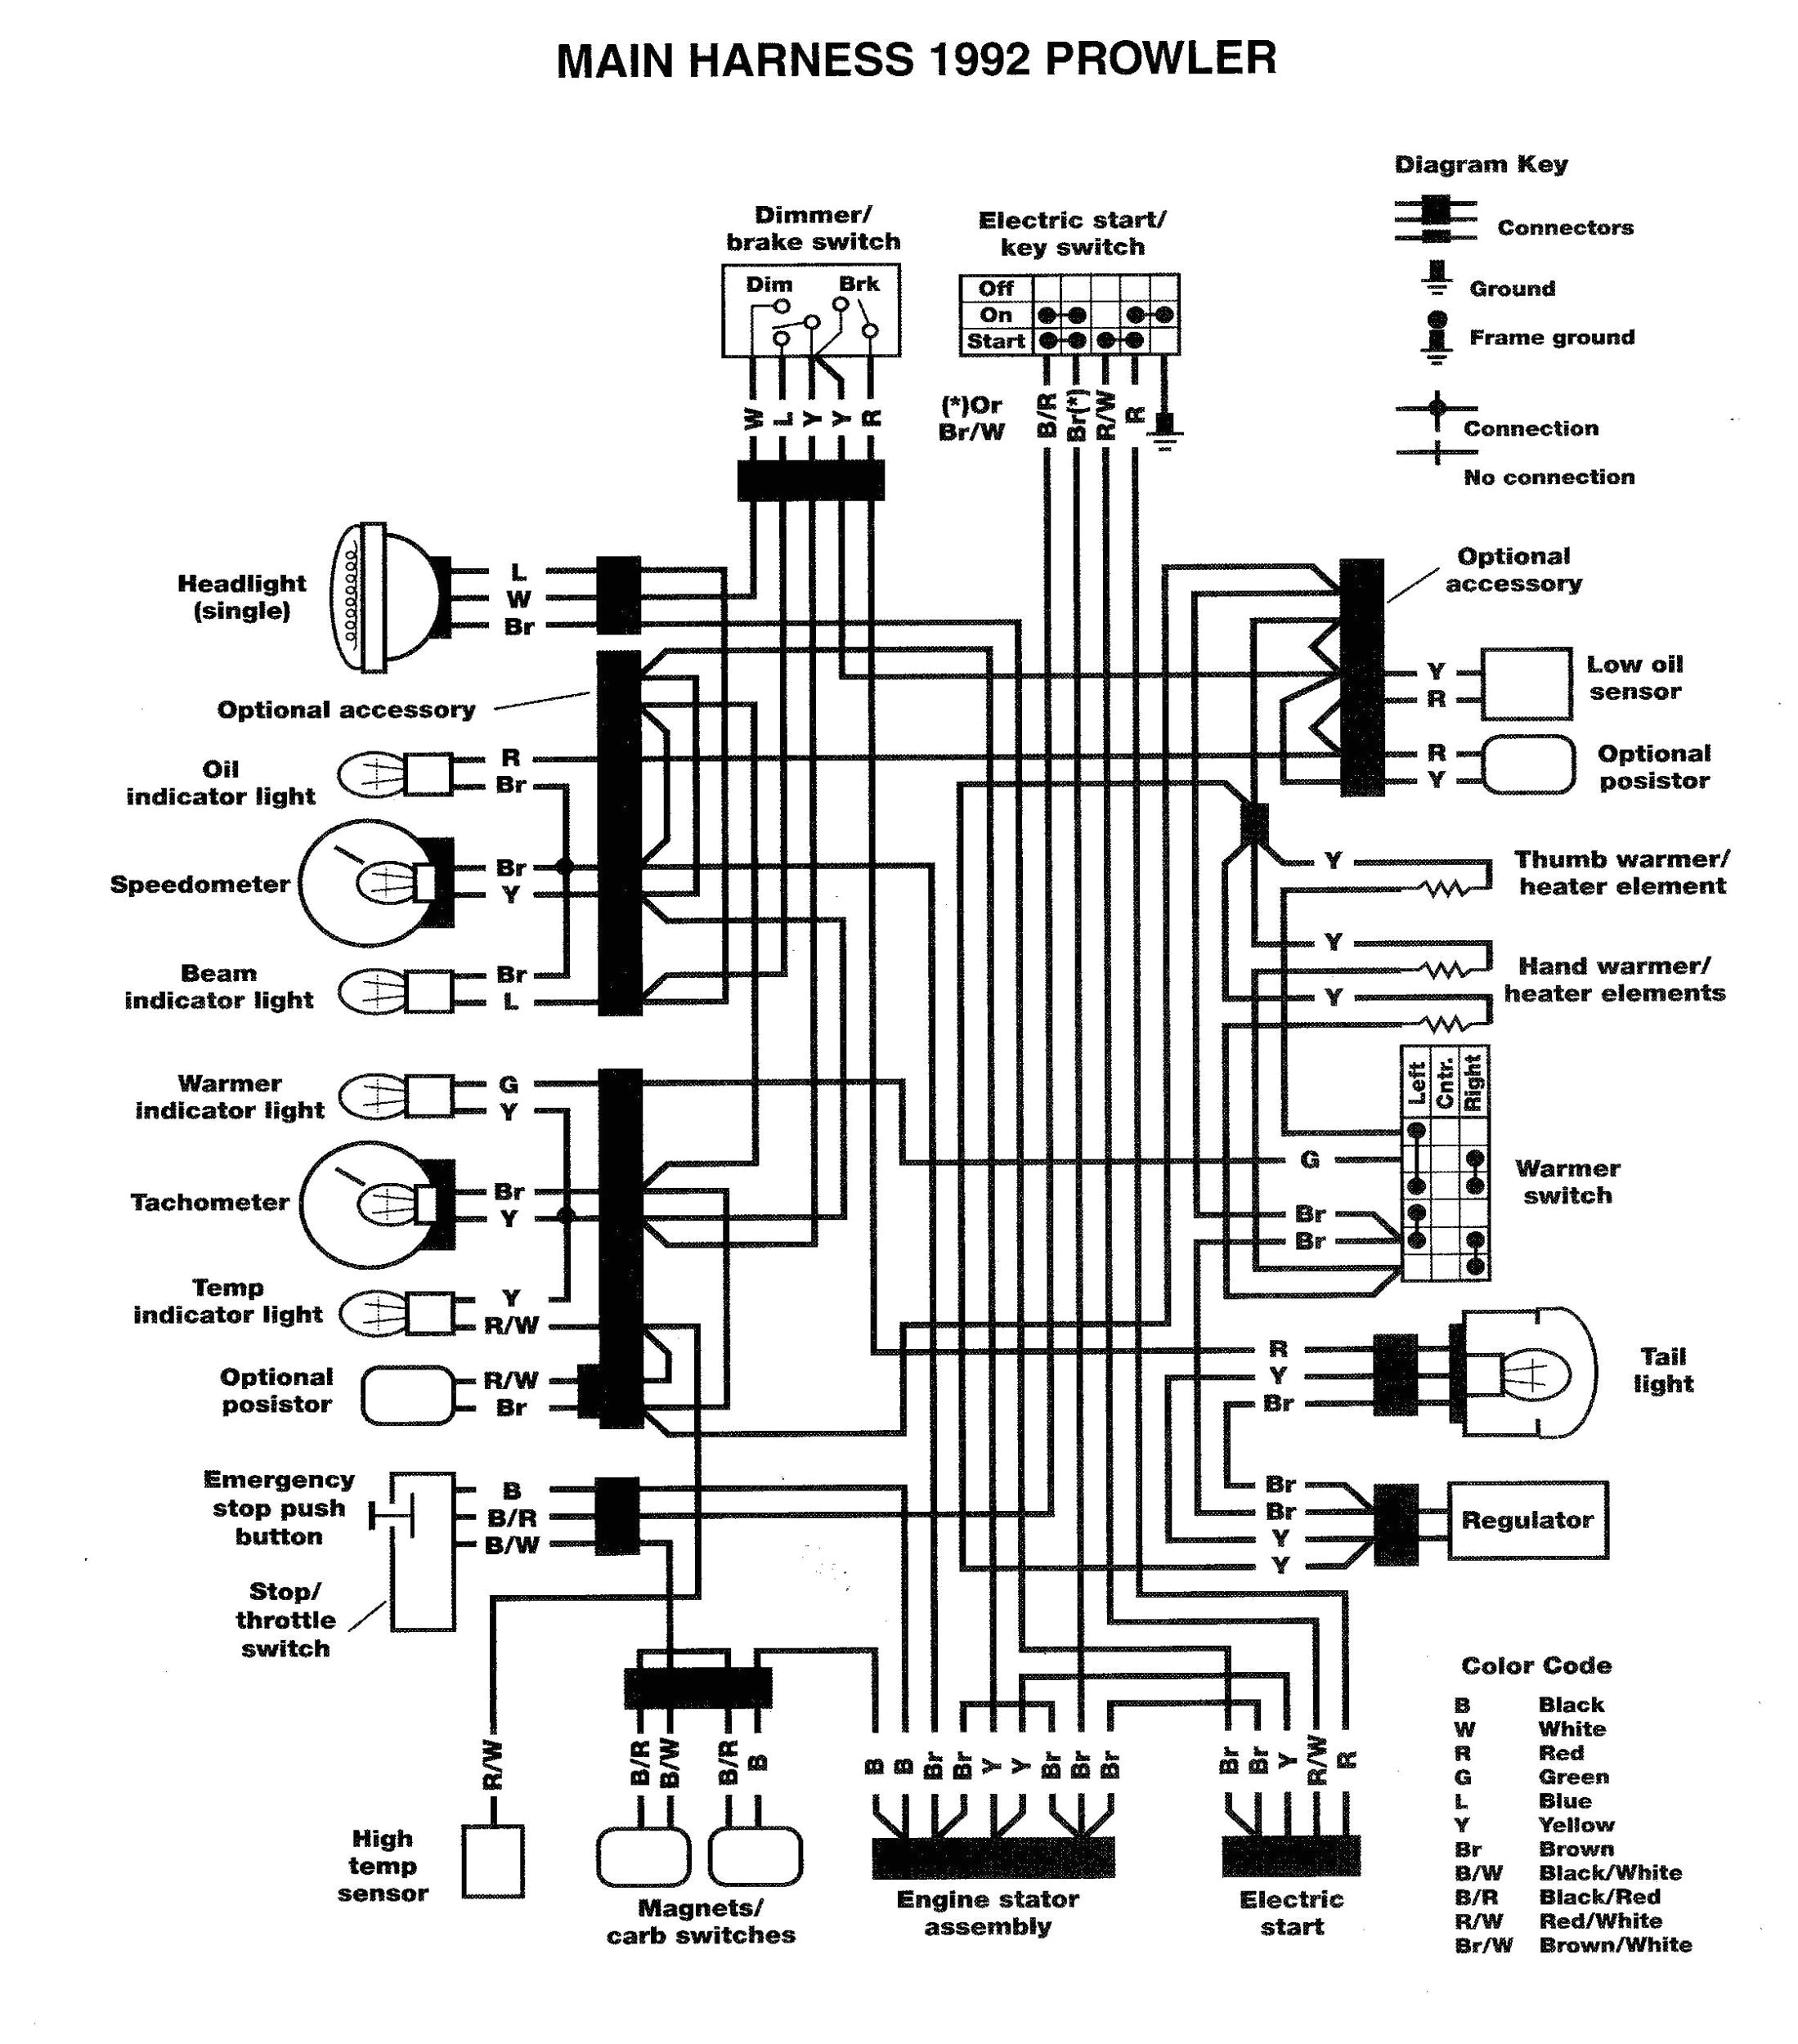 grizzly 660 parts diagram for yamaha 300 wiring diagram free wiring diagram for you e280a2 and grizzly 660 parts diagram jpg